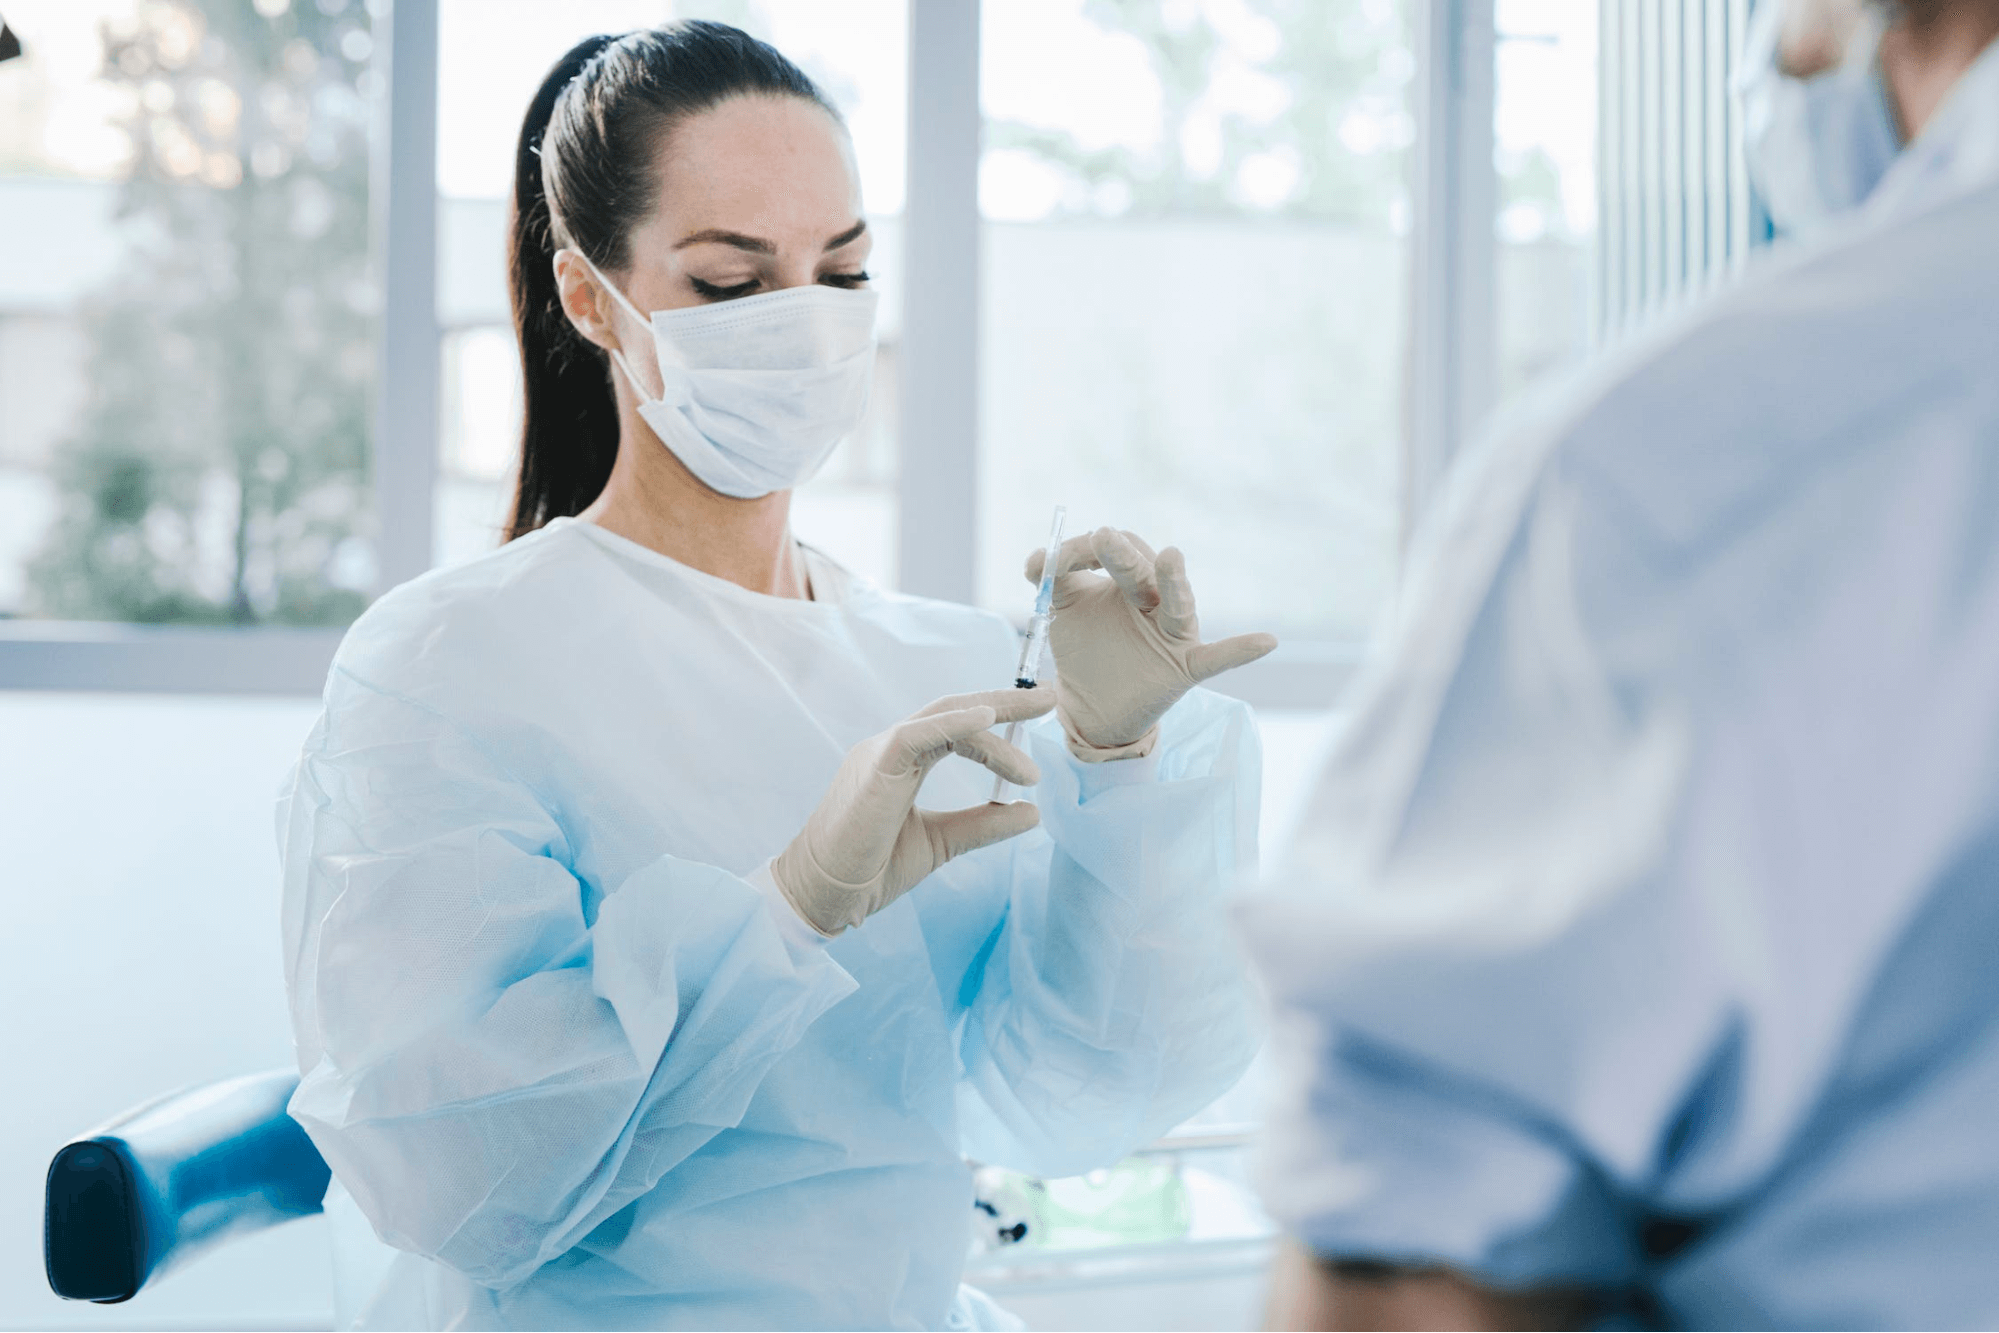 Medical Professional Wearing Medical Gown